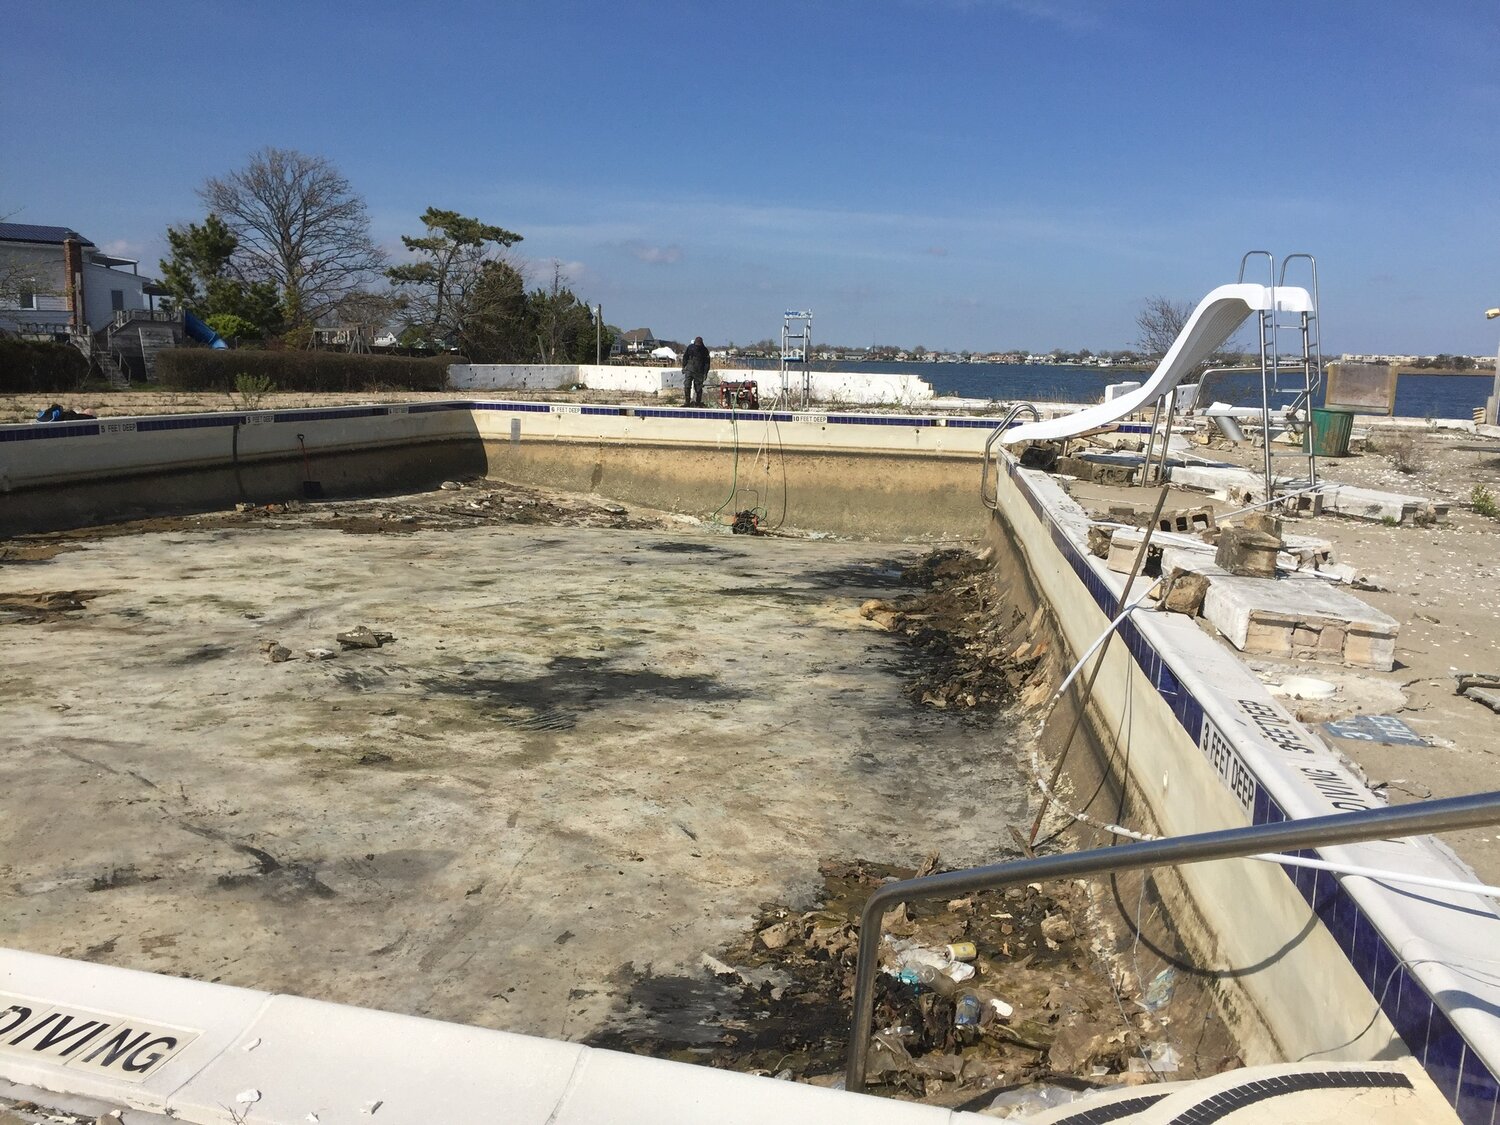 The pool of what was once the beach club is now filled only with debris.